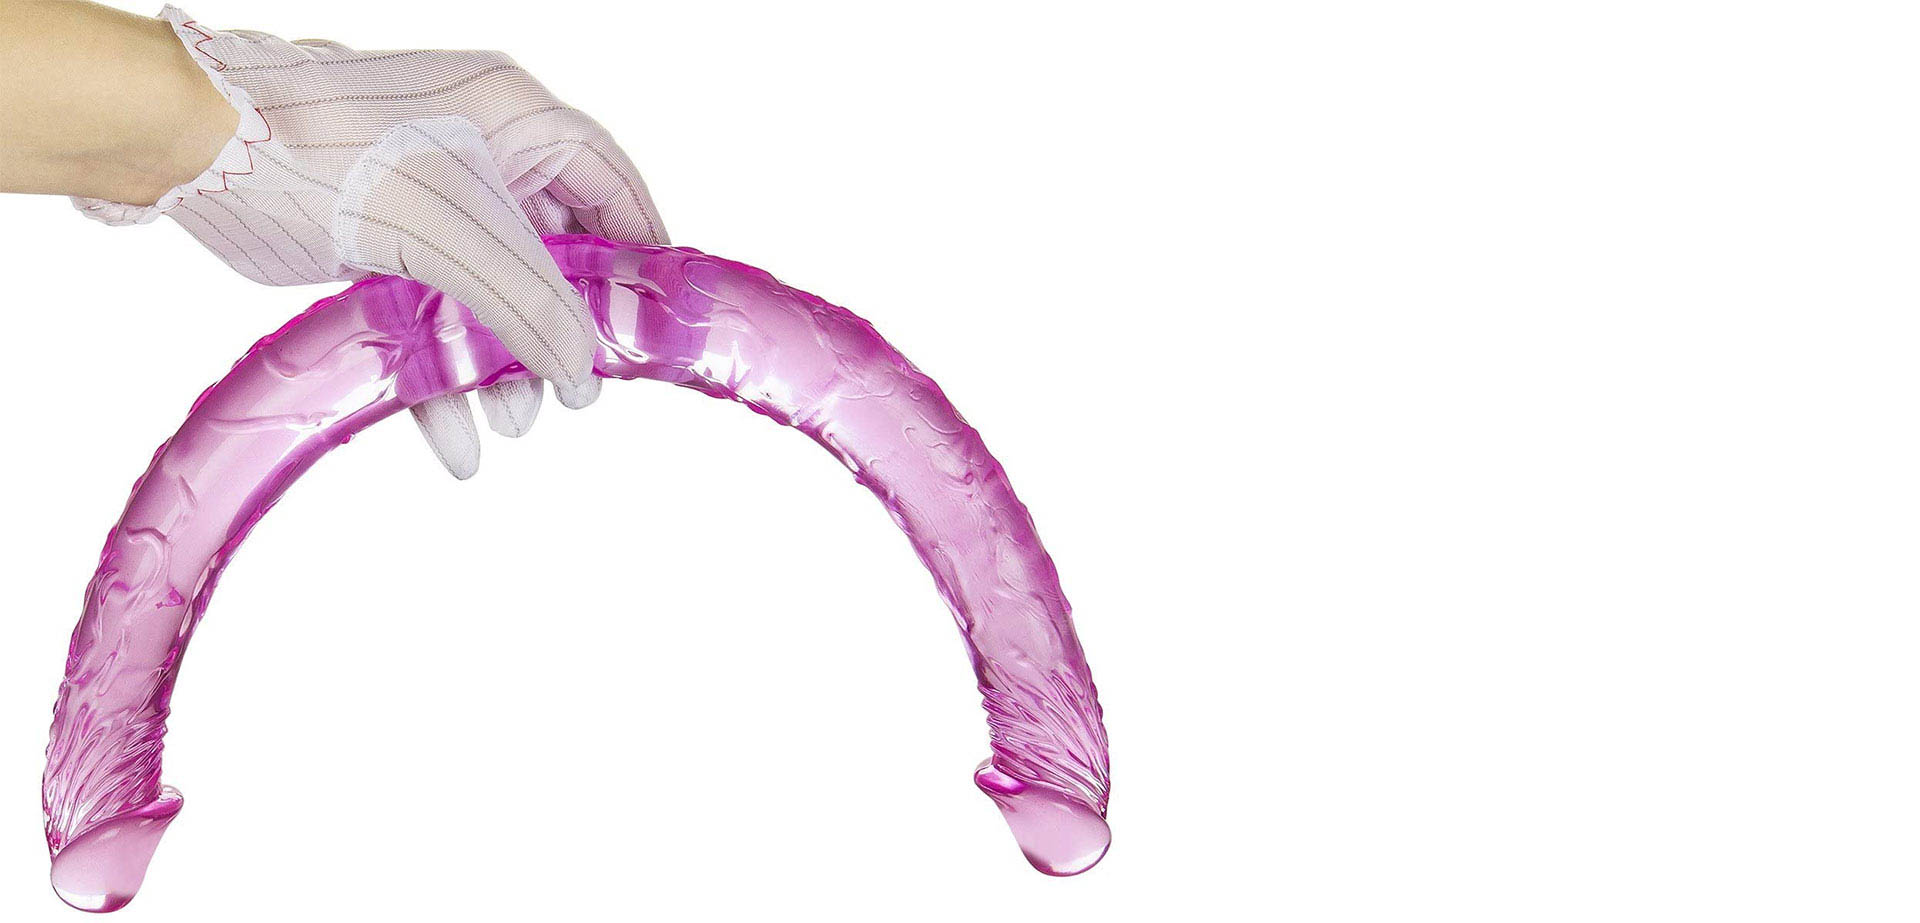 Double-Sided Curved Dildo.